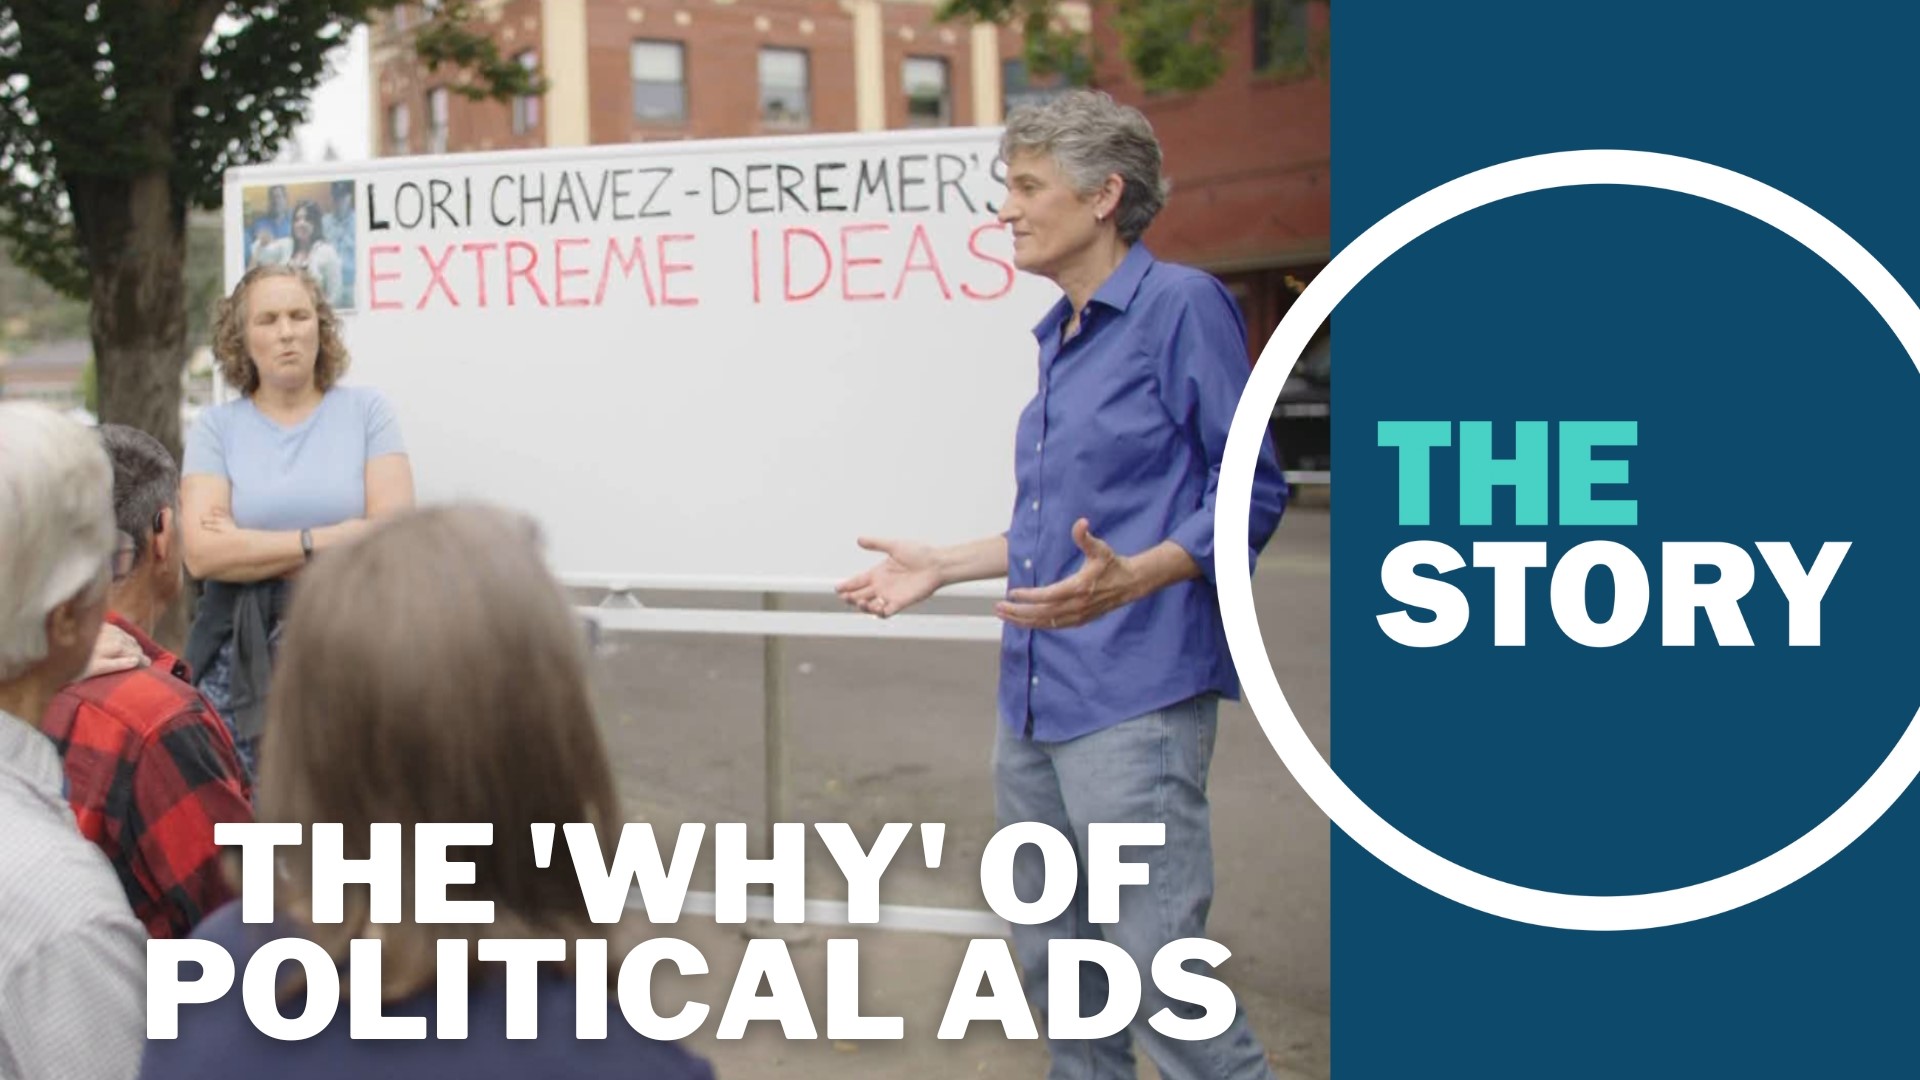 With the November midterm election coming up, political ads are everywhere. We dug into what exactly campaigns are trying to do with those ads.